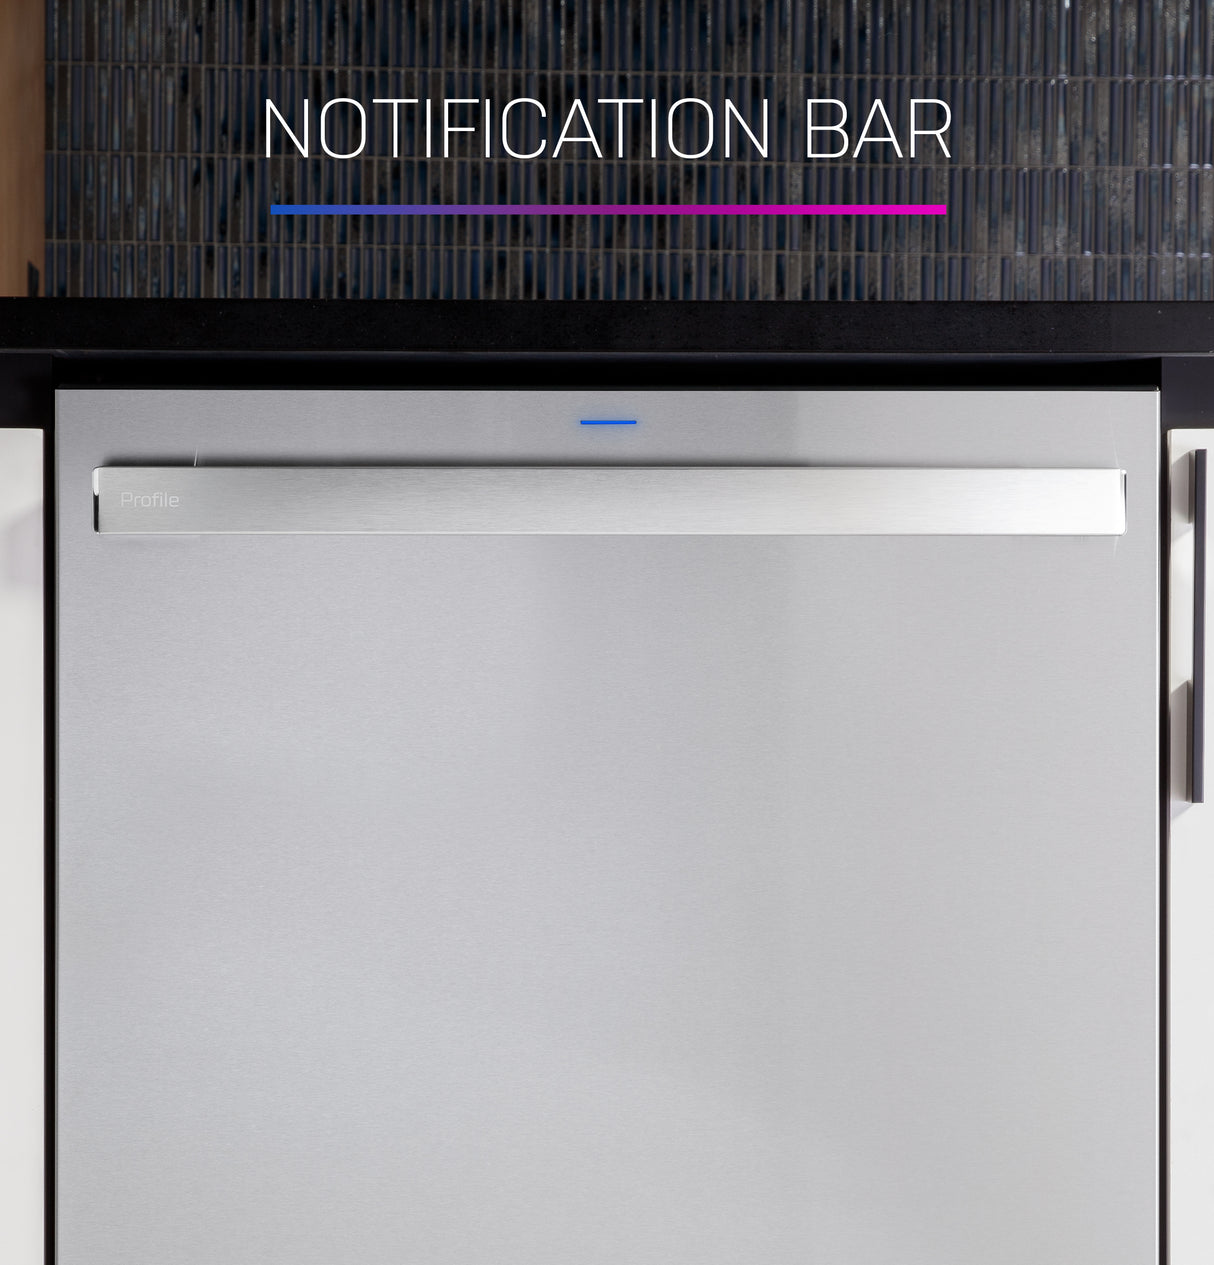 GE Profile(TM) ENERGY STAR(R) Fingerprint Resistant Top Control Stainless Interior Dishwasher with Microban(TM) Antimicrobial Protection with Sanitize Cycle - (PDT715SYVFS)